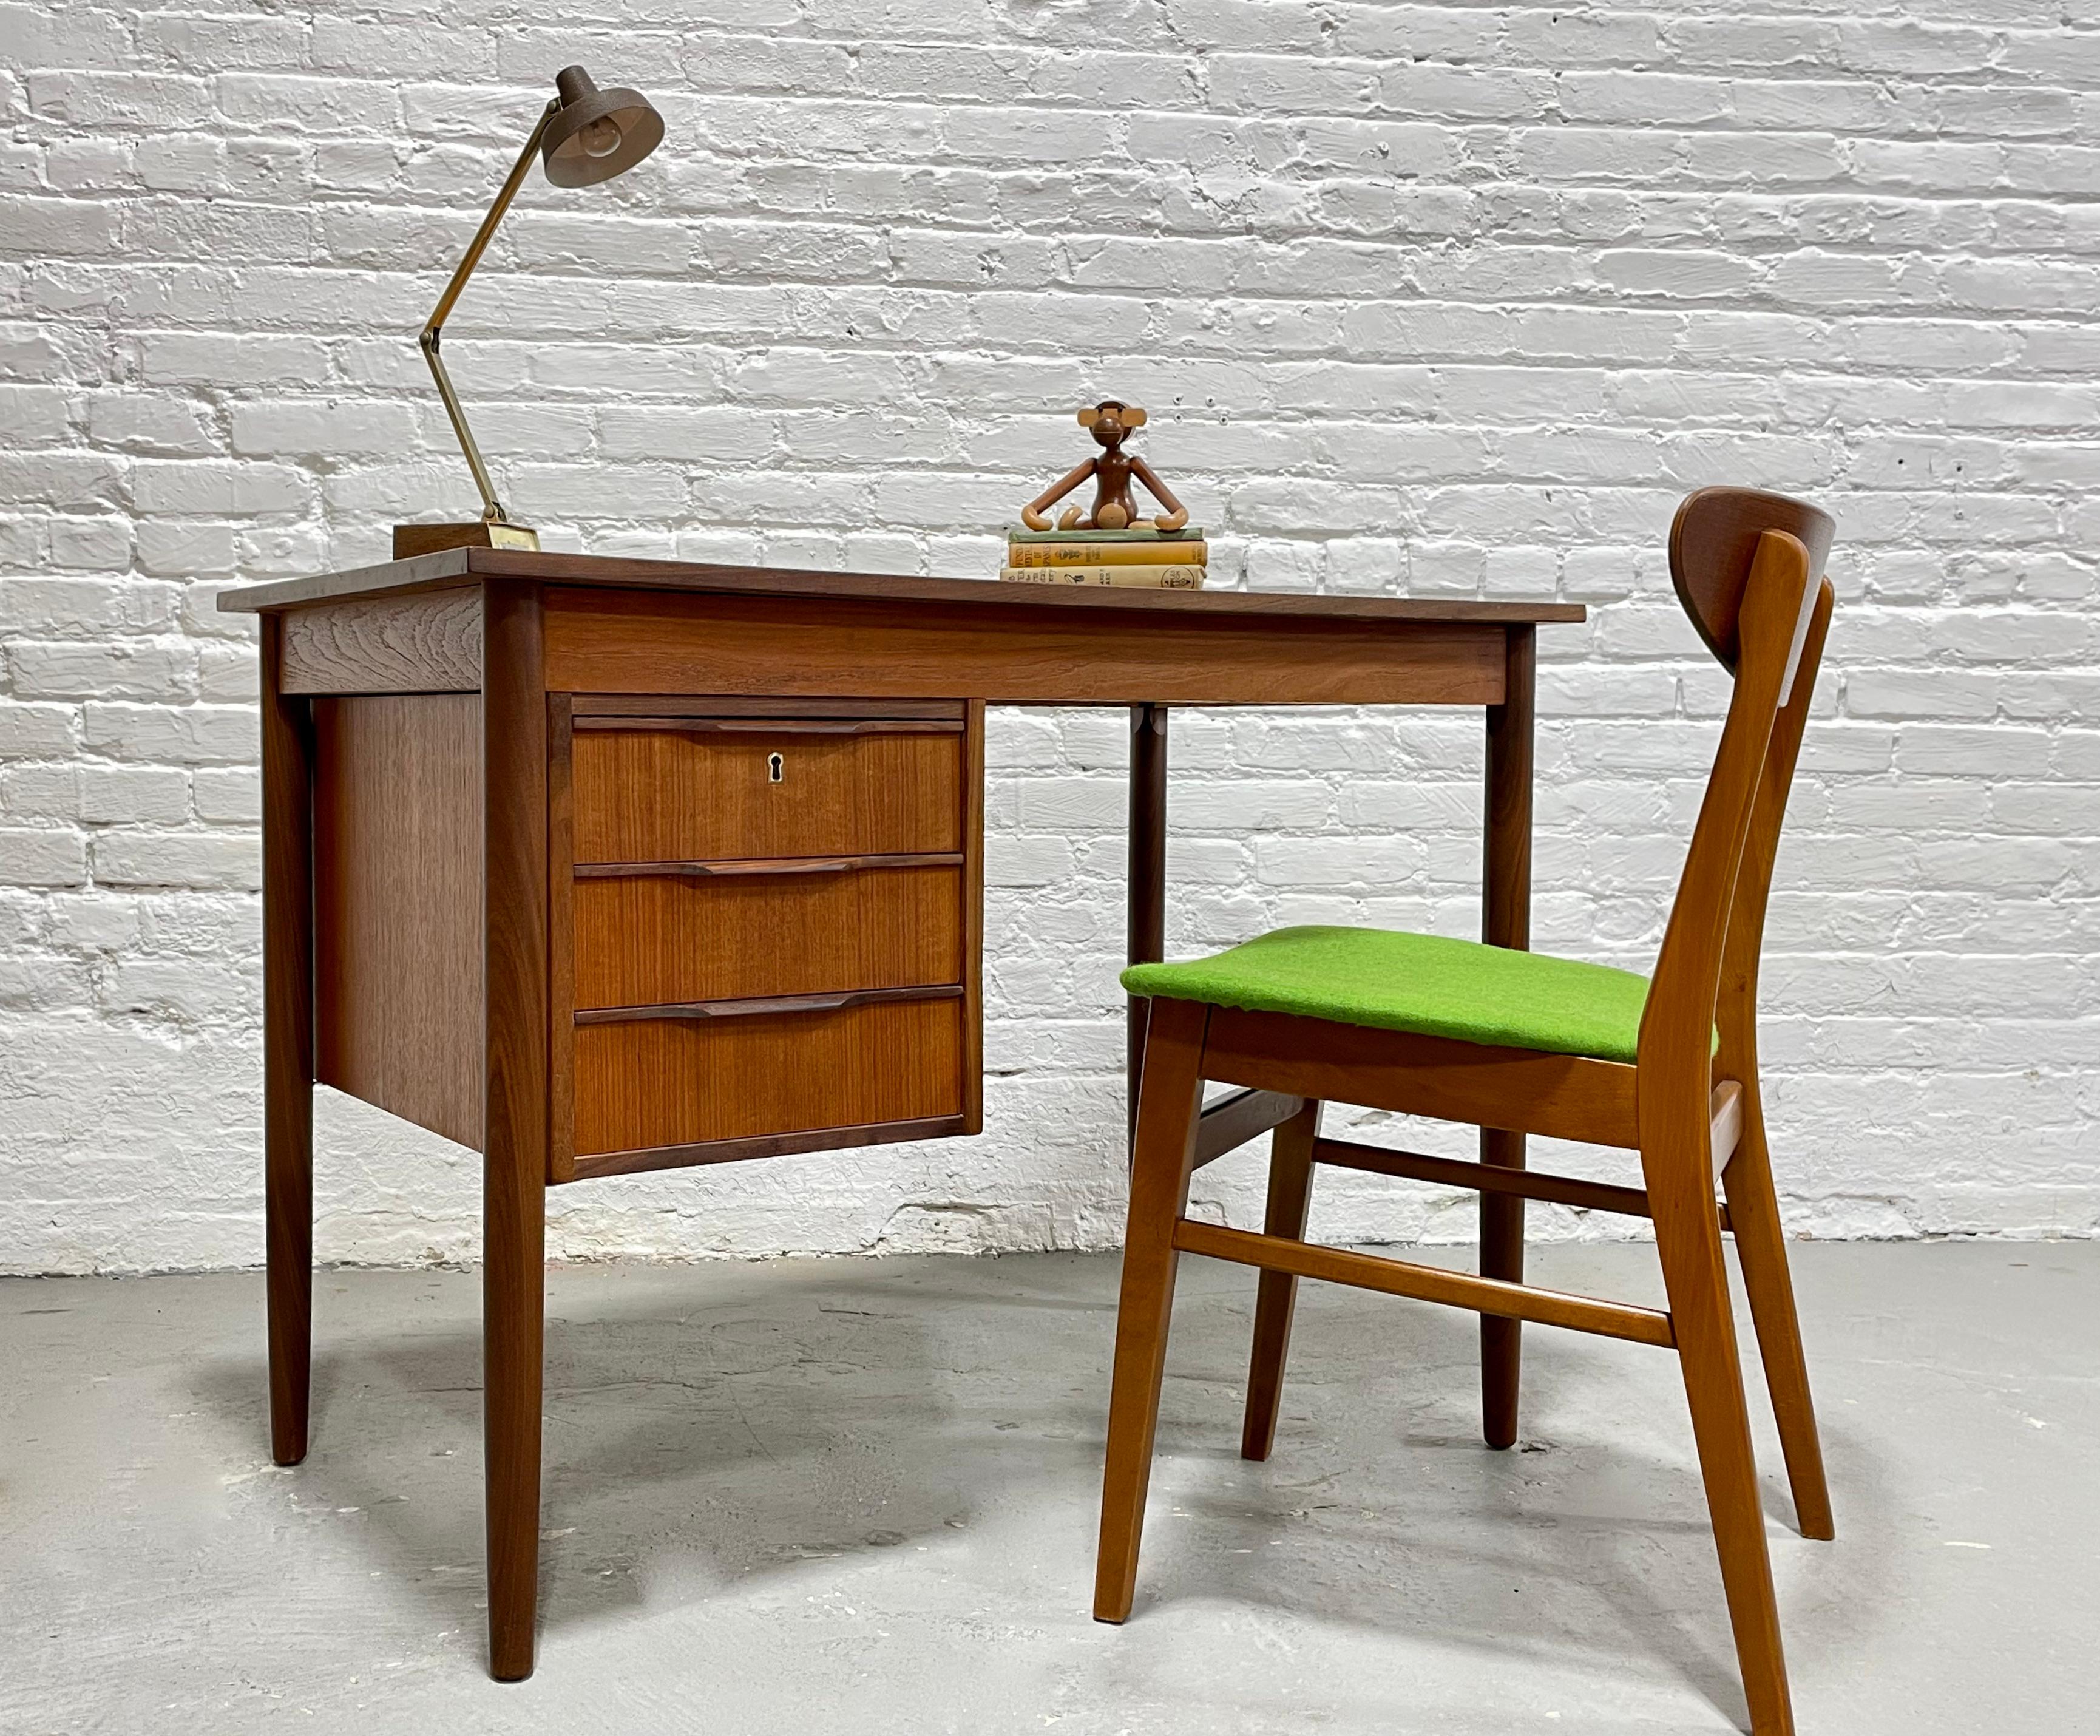 Apartment sized Mid Century Modern Danish Teak Desk by Faarup Mobelfabrik, circa 1960s. Perfectly sized for an apartment or smaller office space yet offers a generous workspace.   Three dovetailed drawers with sculpted hand pulls and a newly